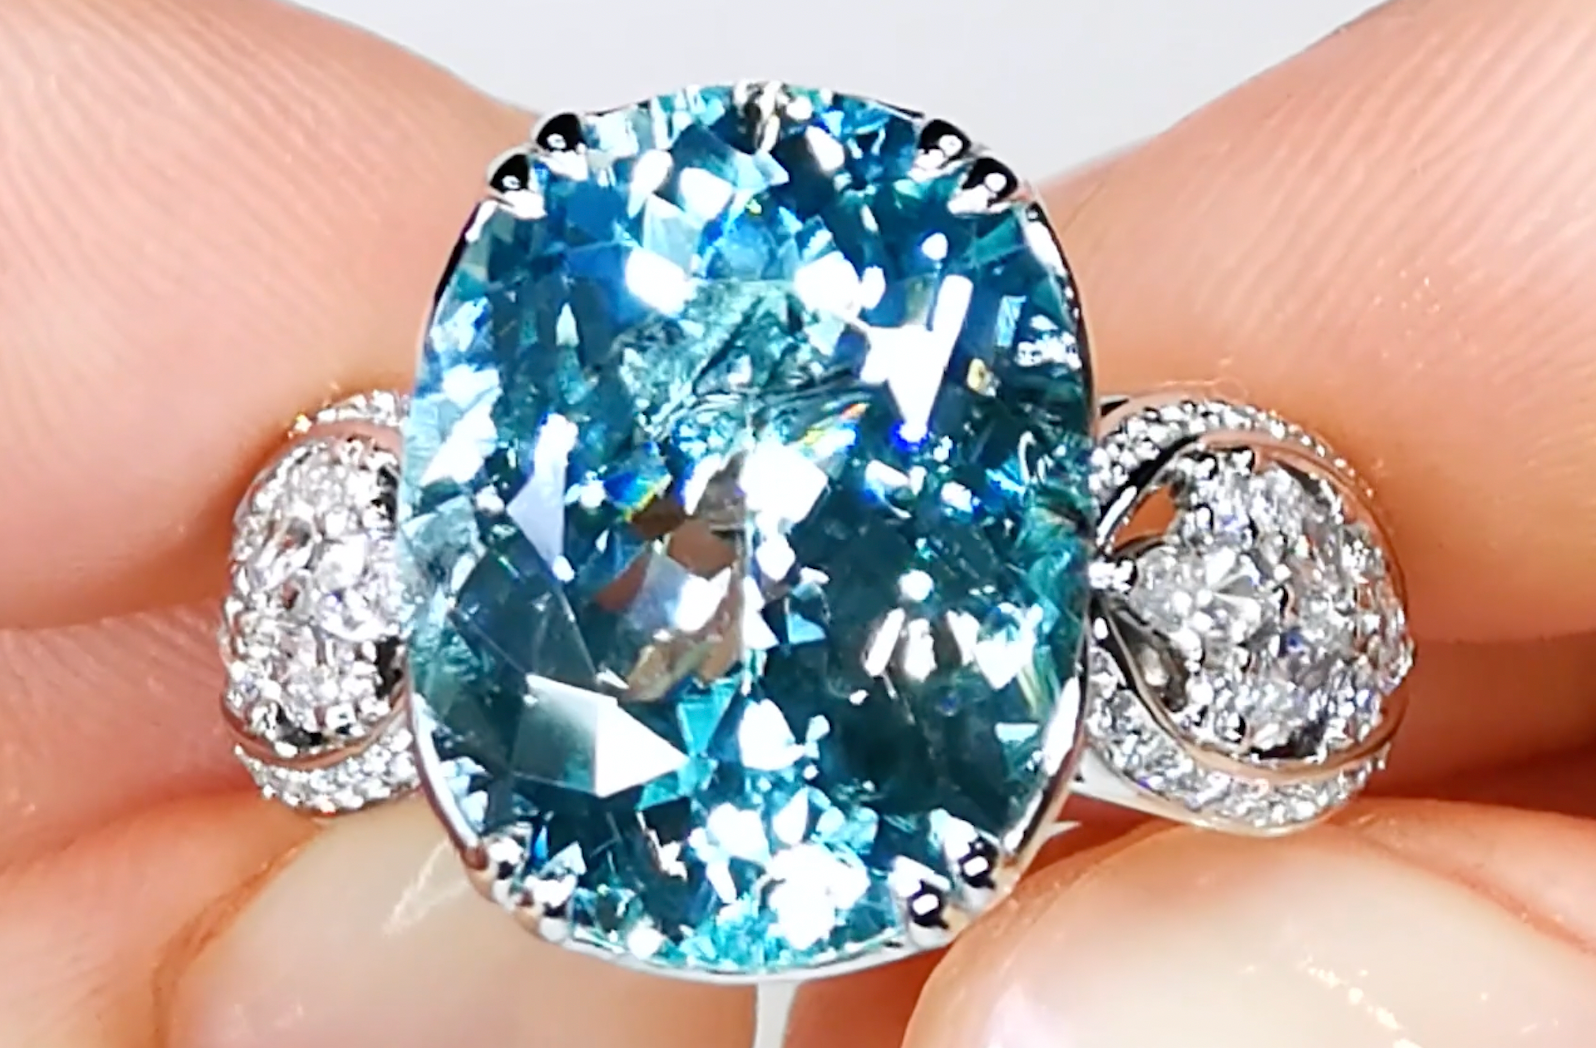 9.43ct Unheated Flawless Paraiba Tourmaline Ring with D Flawless Diamonds set in 18K White Gold